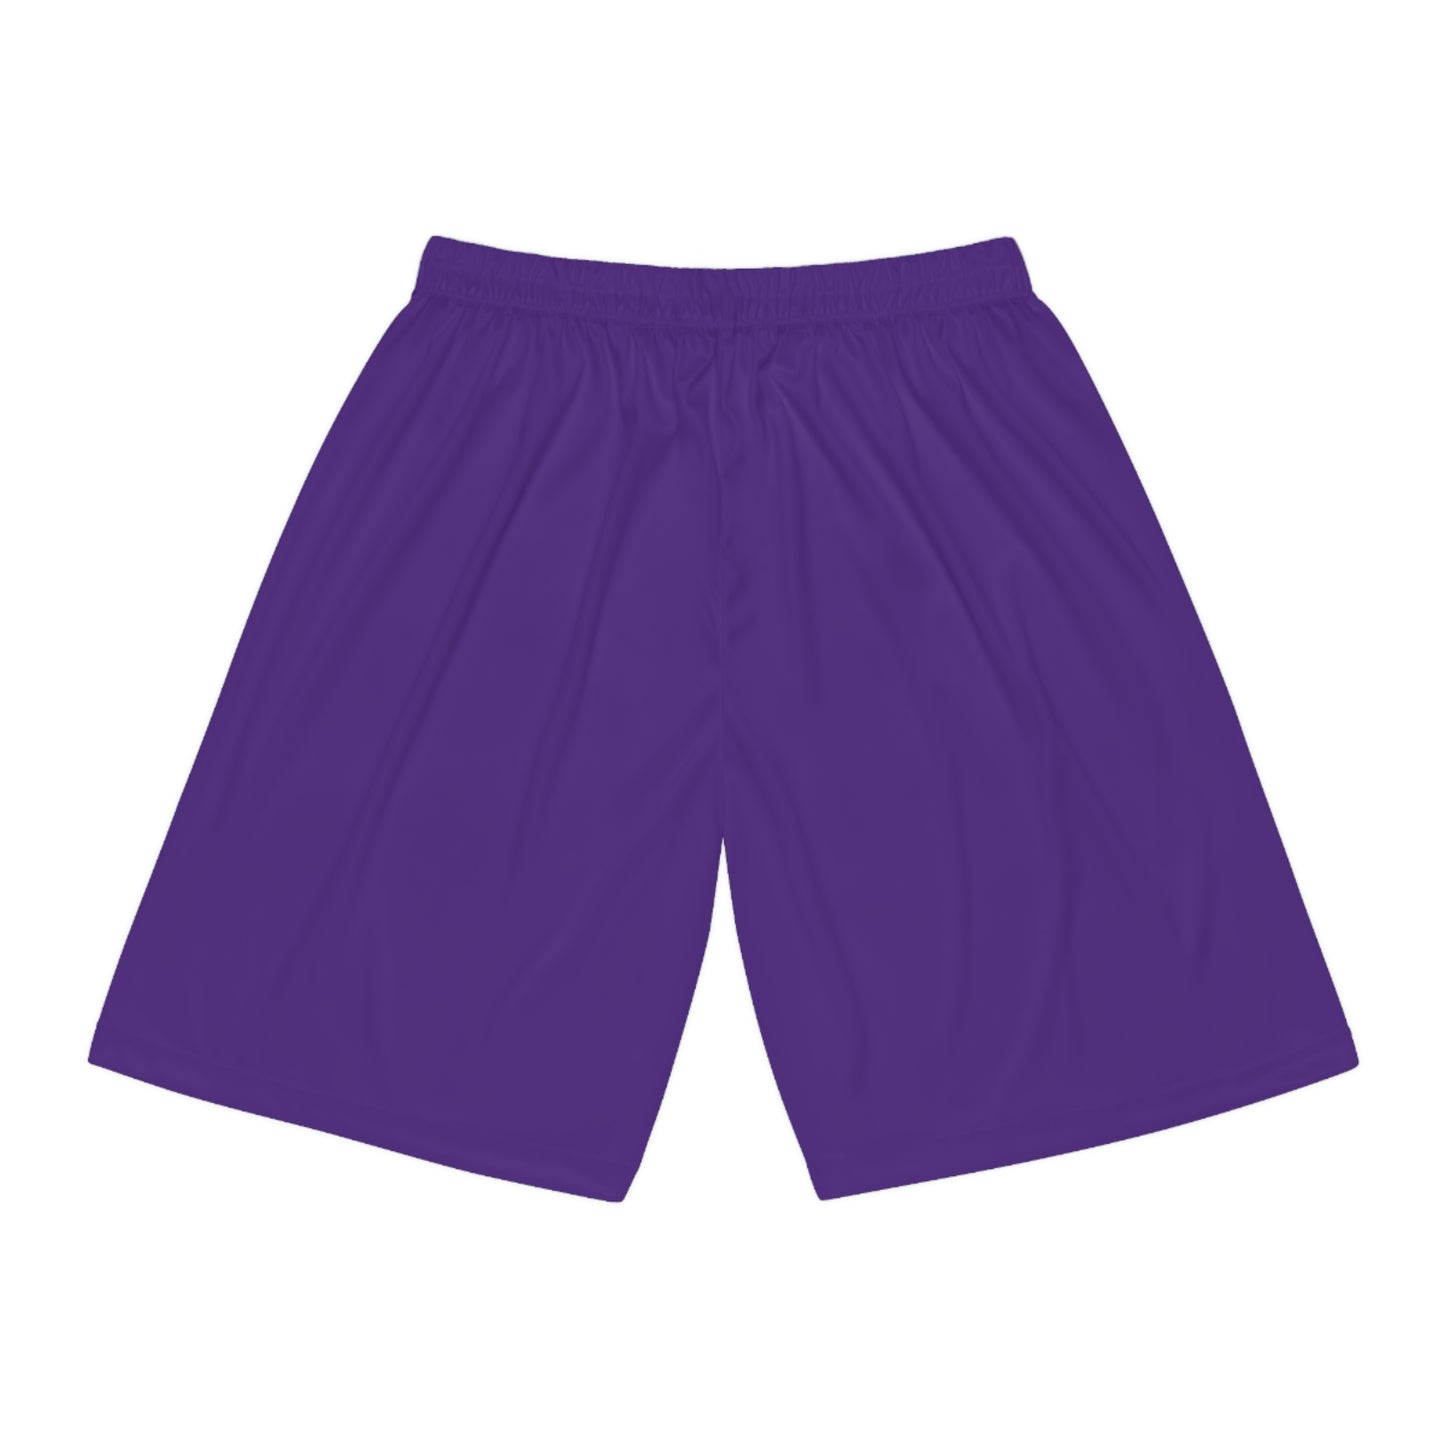 theDopeOnes Finals Shorts (Kings)